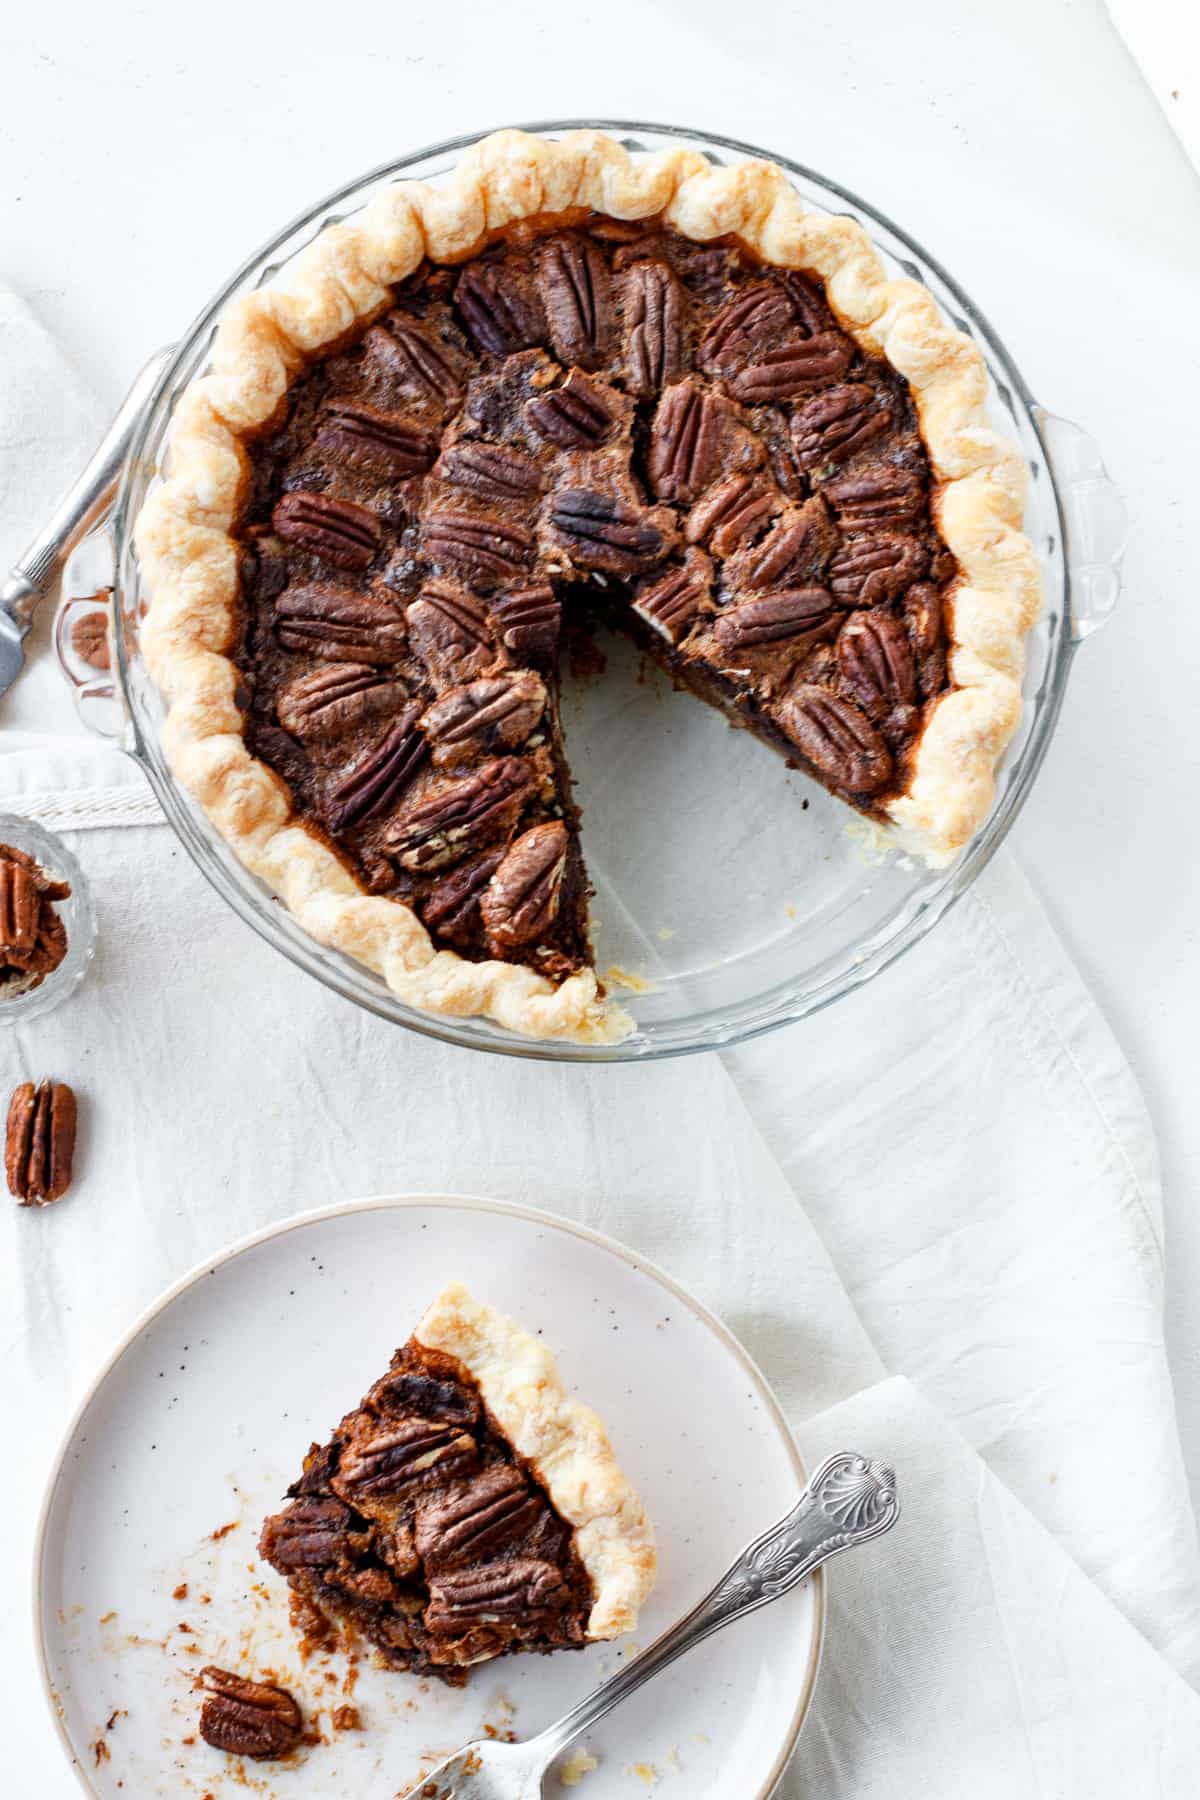 Aerial view of pecan pie in glass dish, slice on a plate with fork, white cloth and surface, loose pecans.